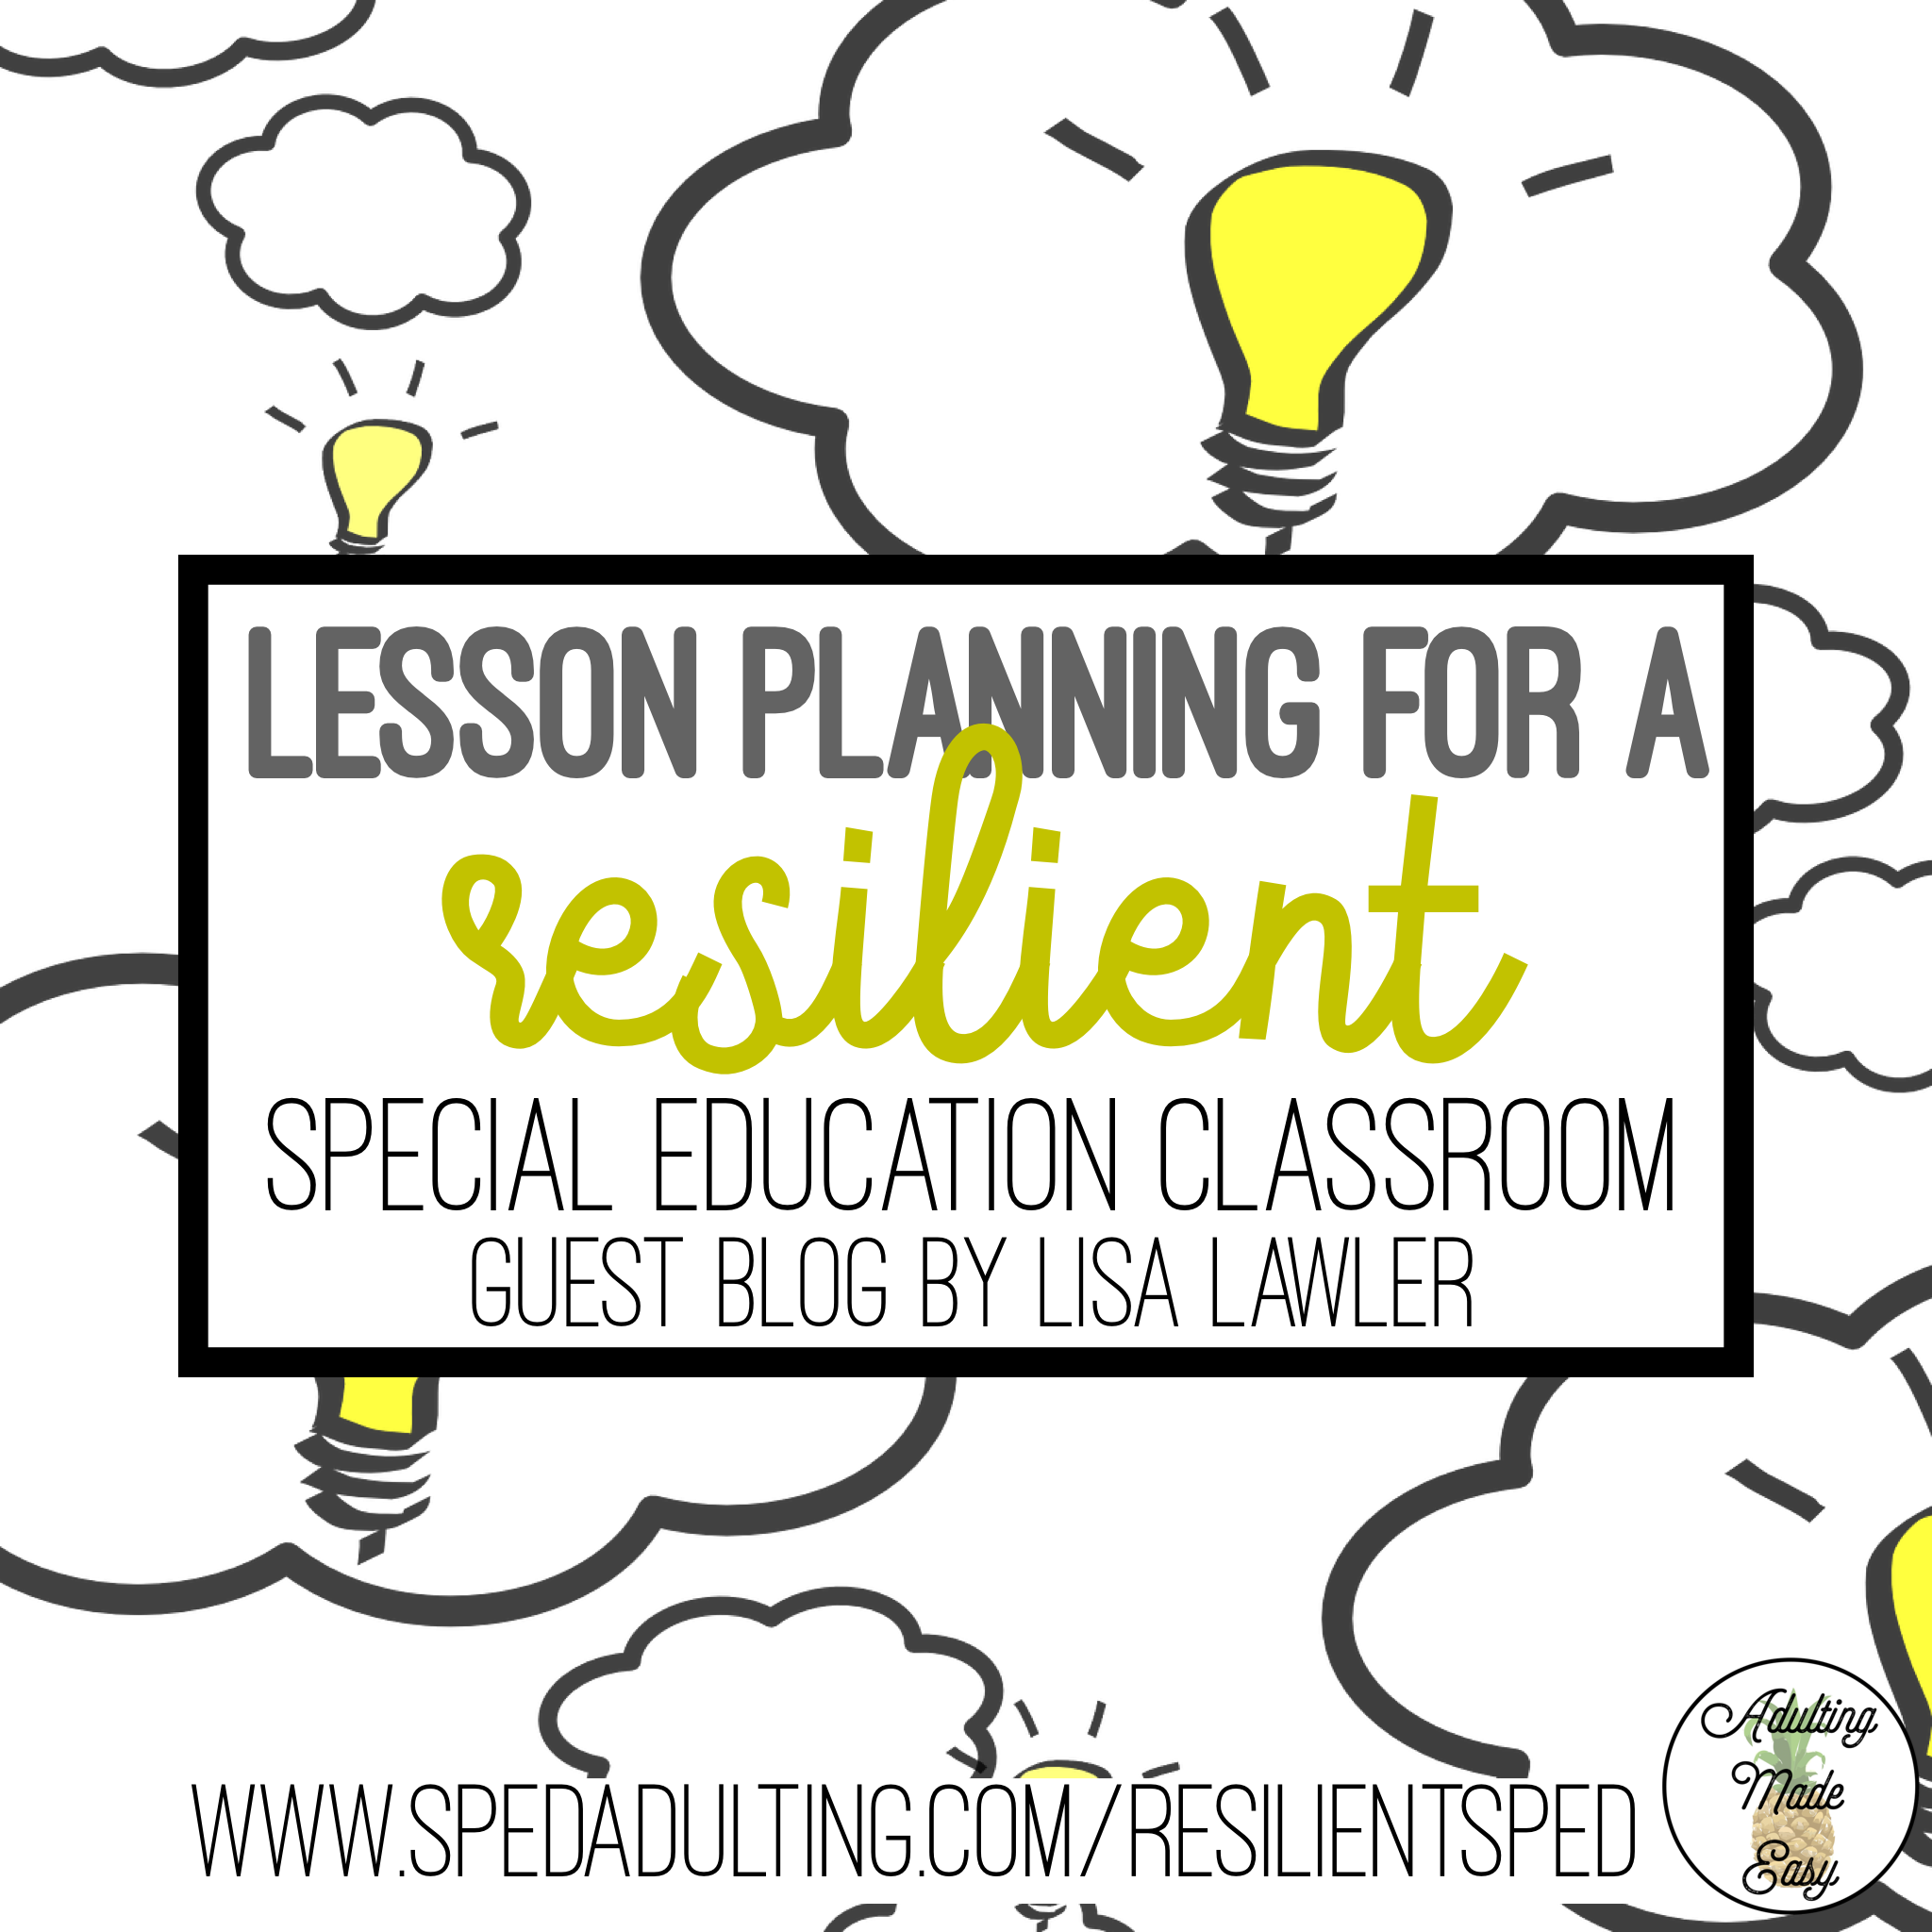 BLOG: Lesson Planning For A Resilient Special Education Classroom